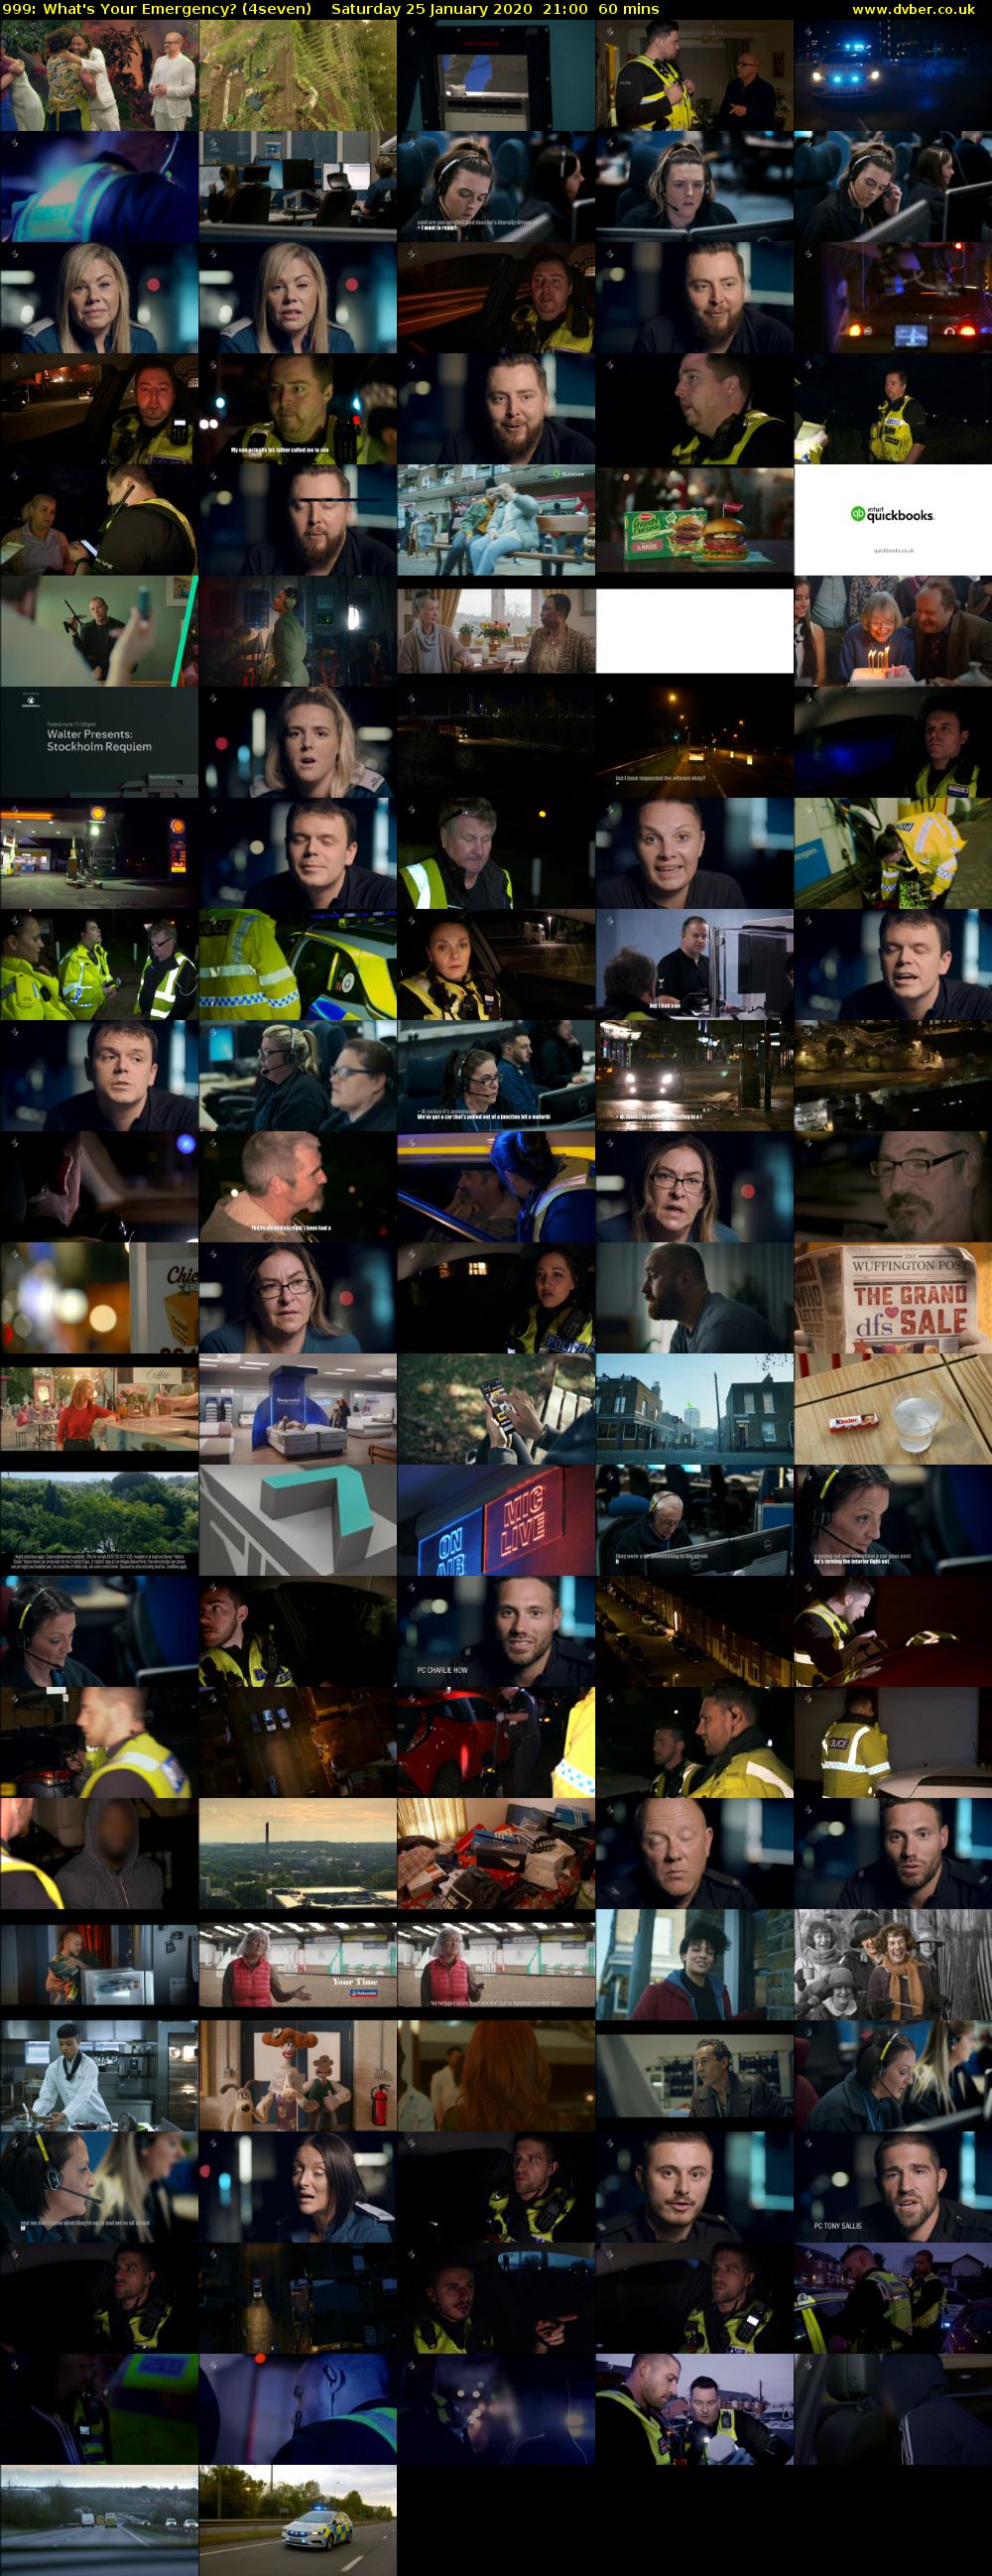 999: What's Your Emergency? (4seven) Saturday 25 January 2020 21:00 - 22:00